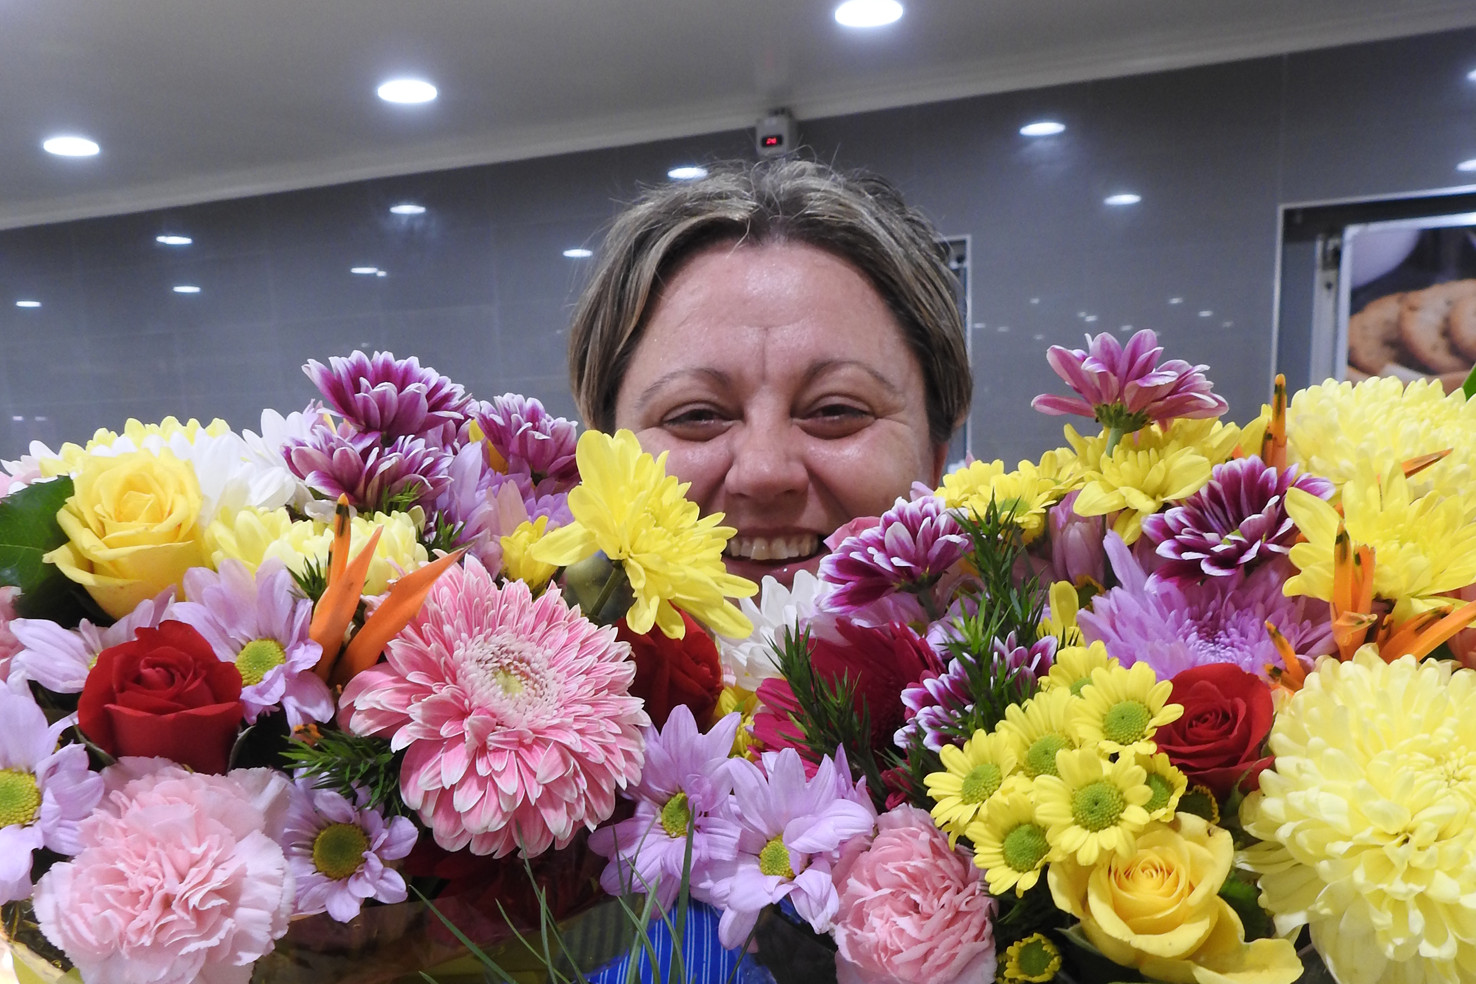 Gordonvale’s Cornetts IGA Supermarket staff member Michelle Tattain shows off some of the store’s 100 per cent locally-grown flowers.